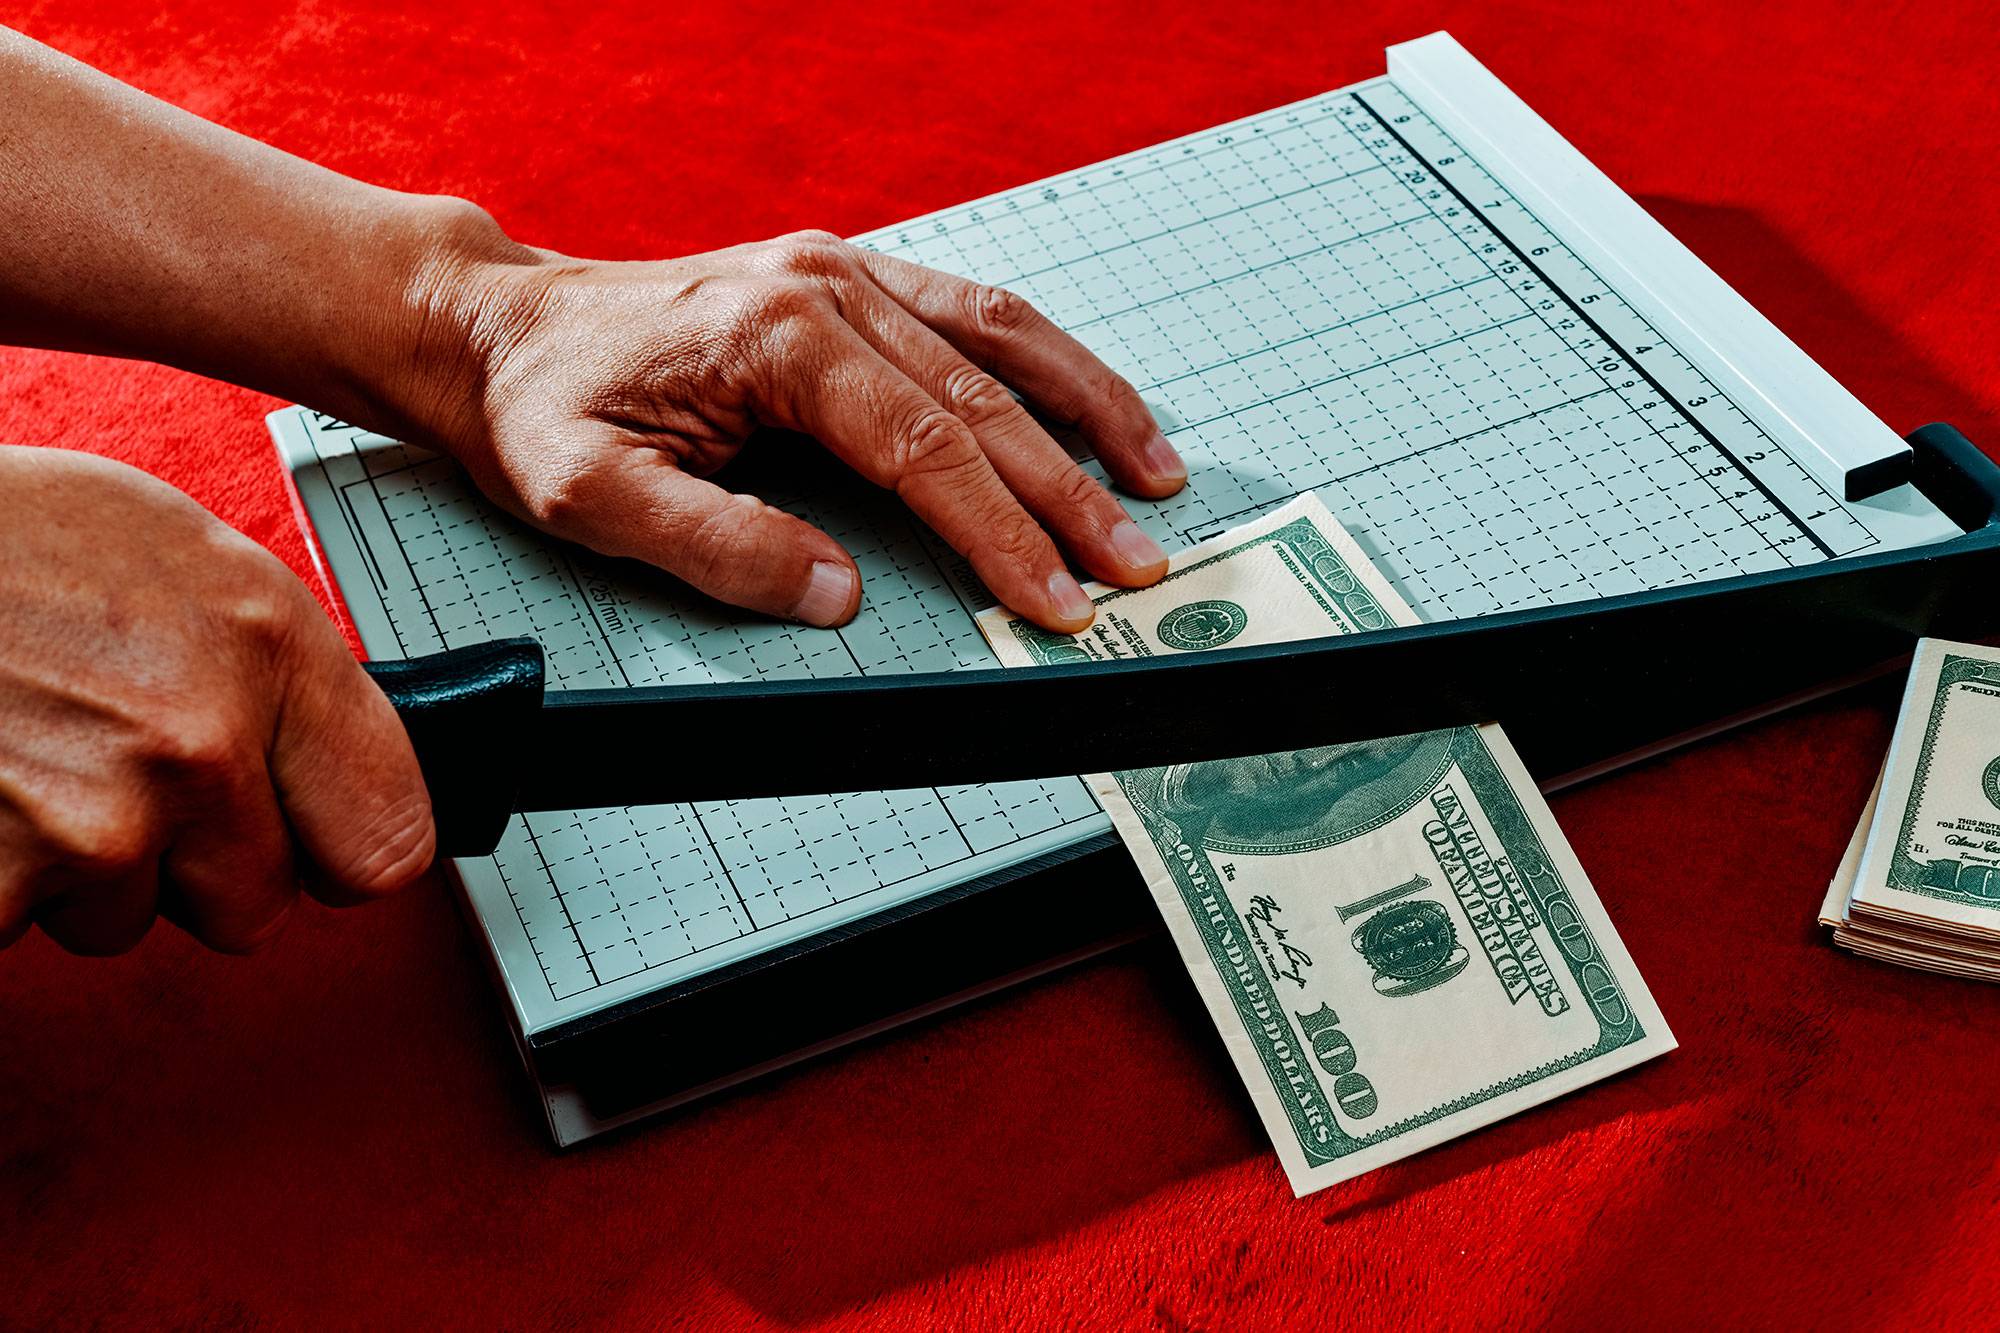 a man is cutting a fake 100 dollar baknote with a paper cutter placed on a fuzzy red fabric surface